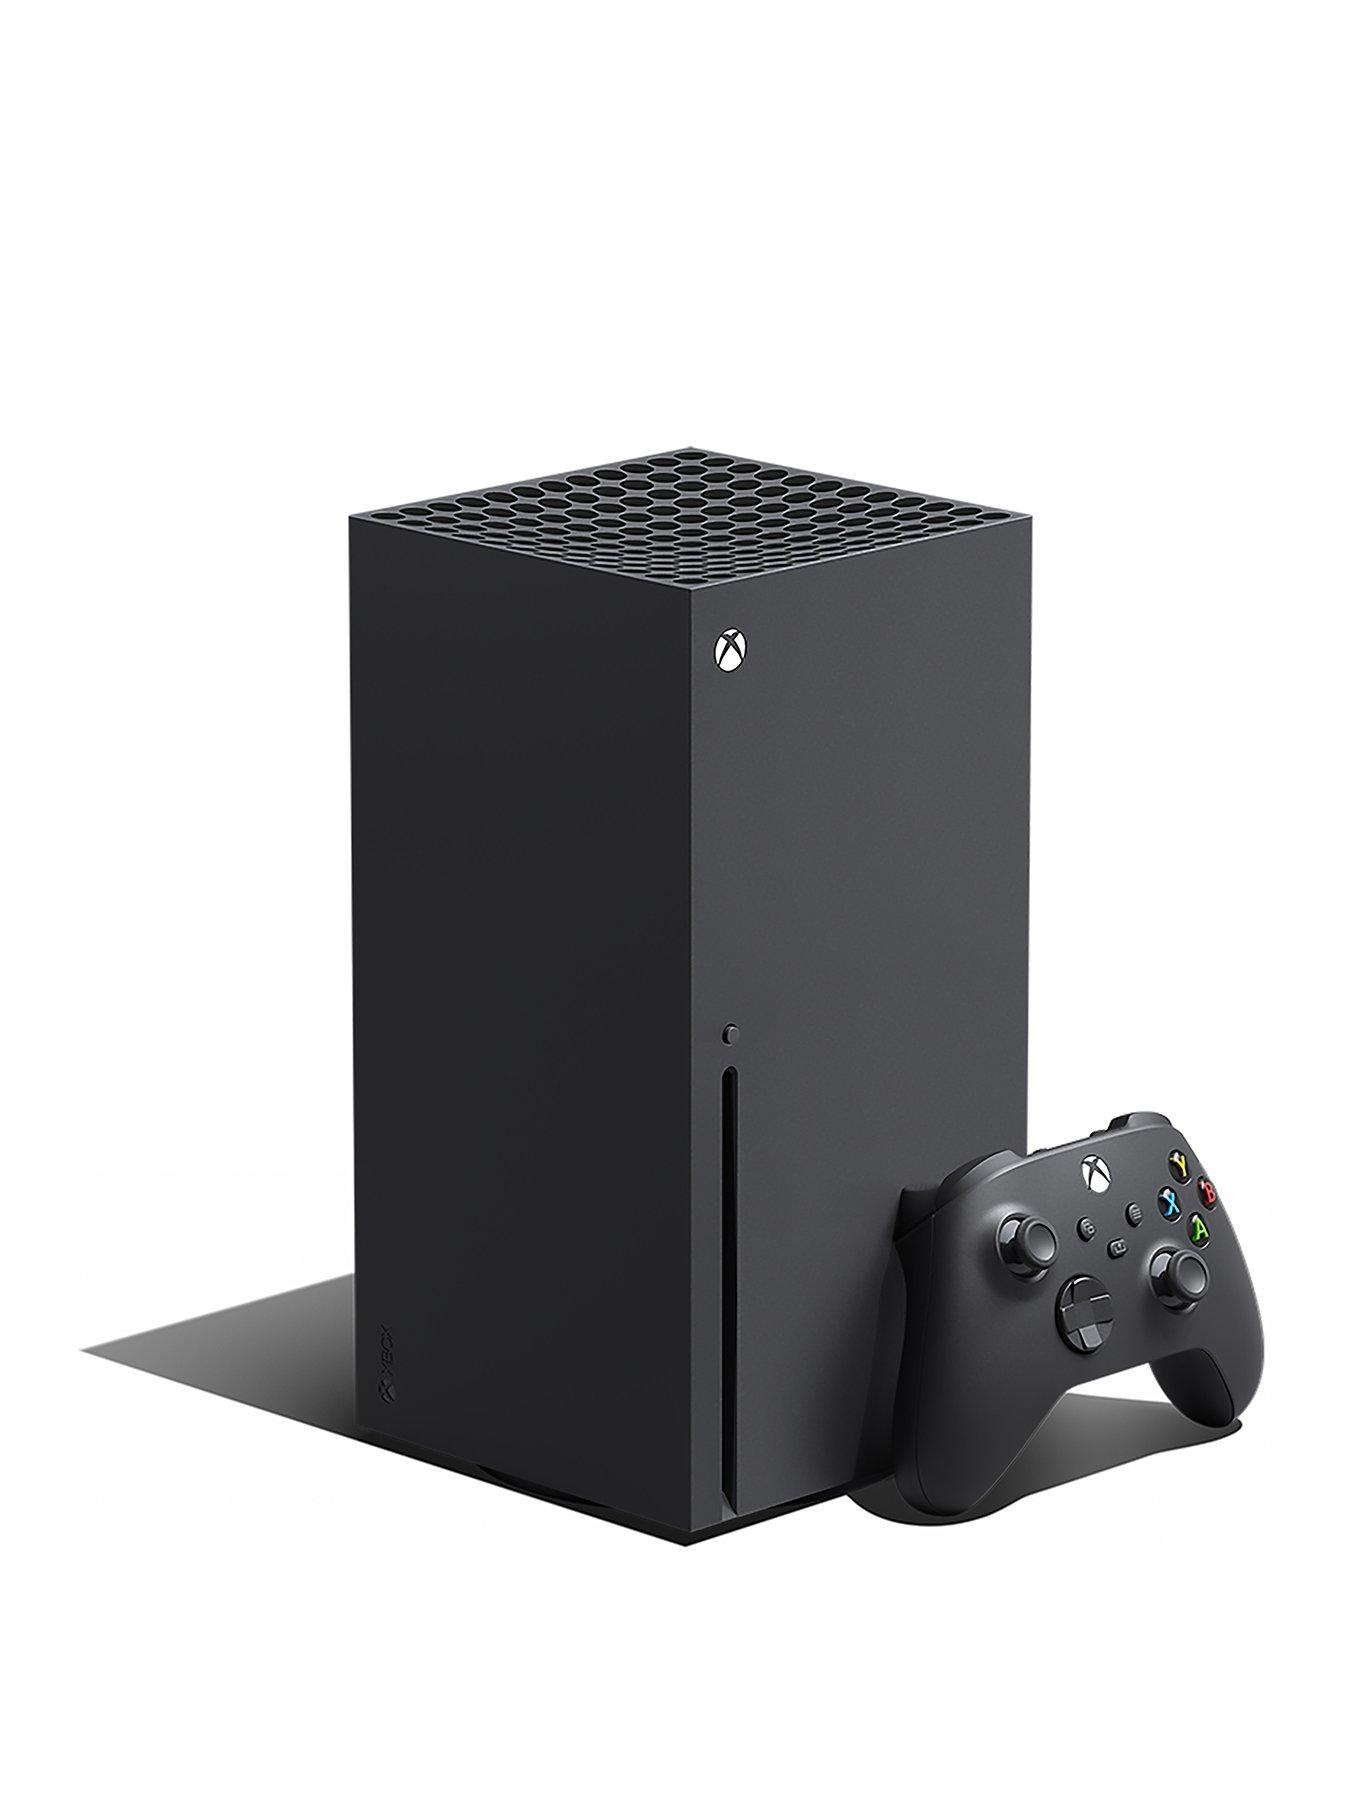 Microsoft Xbox One S 1TB Console + Pro Evolution Soccer 2019 Bundle - New  Open Retail or Brown Box | StackSocial